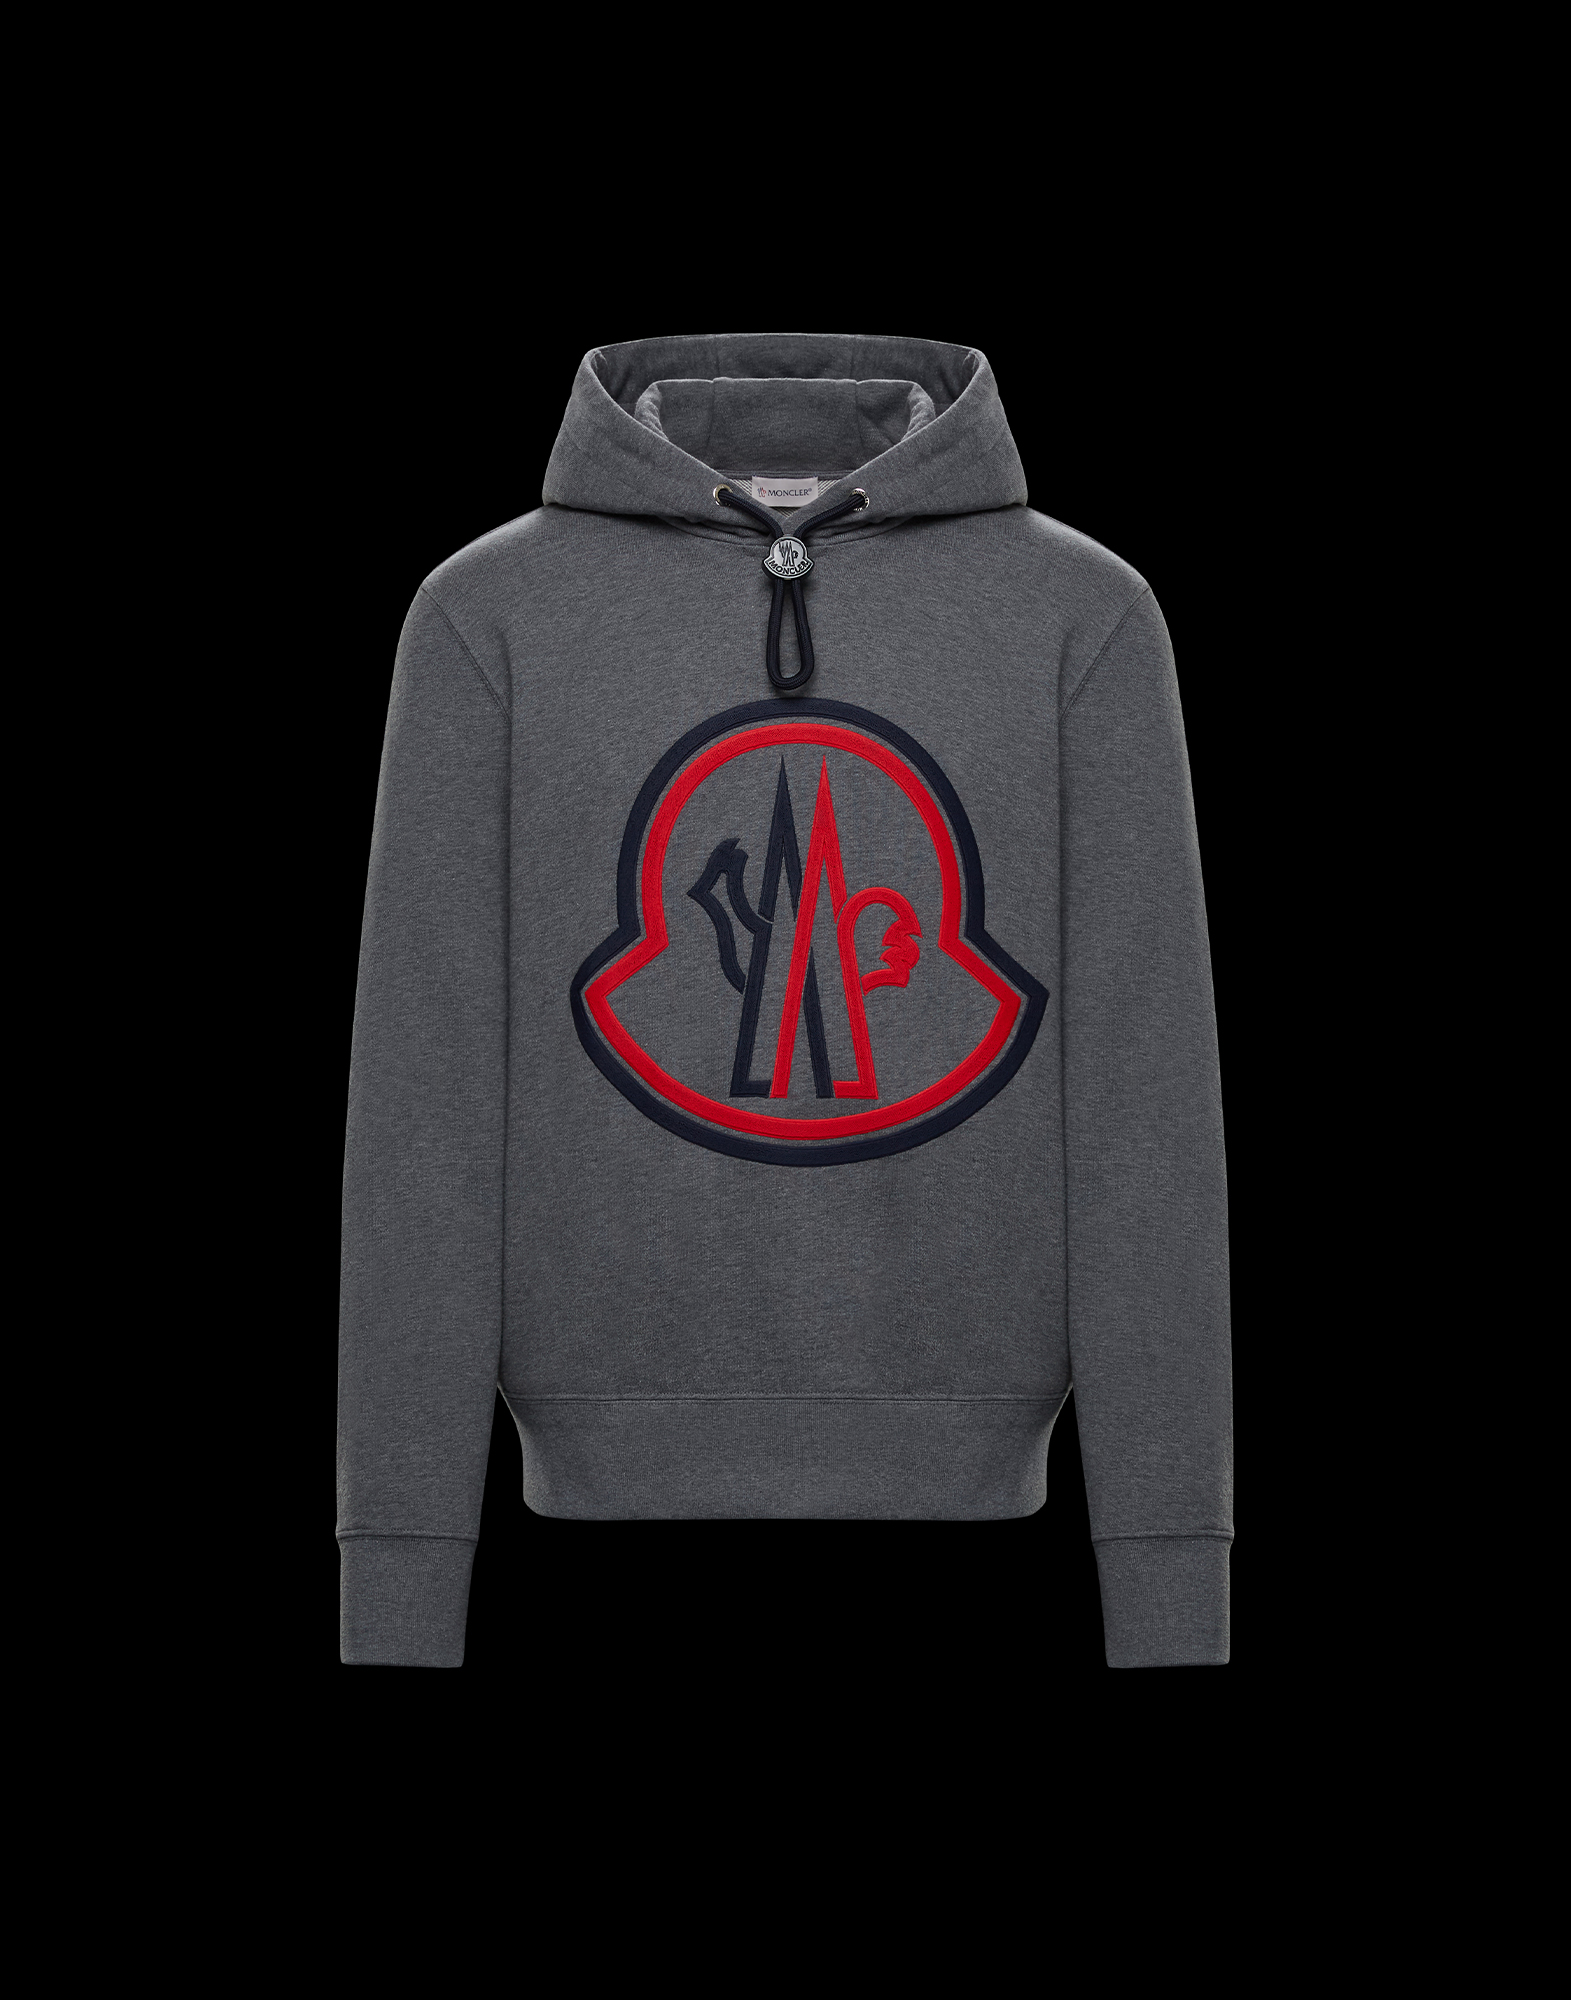 Moncler HOODED JUMPER for Man, HOODED SWEATSHIRTS | Official Online Store